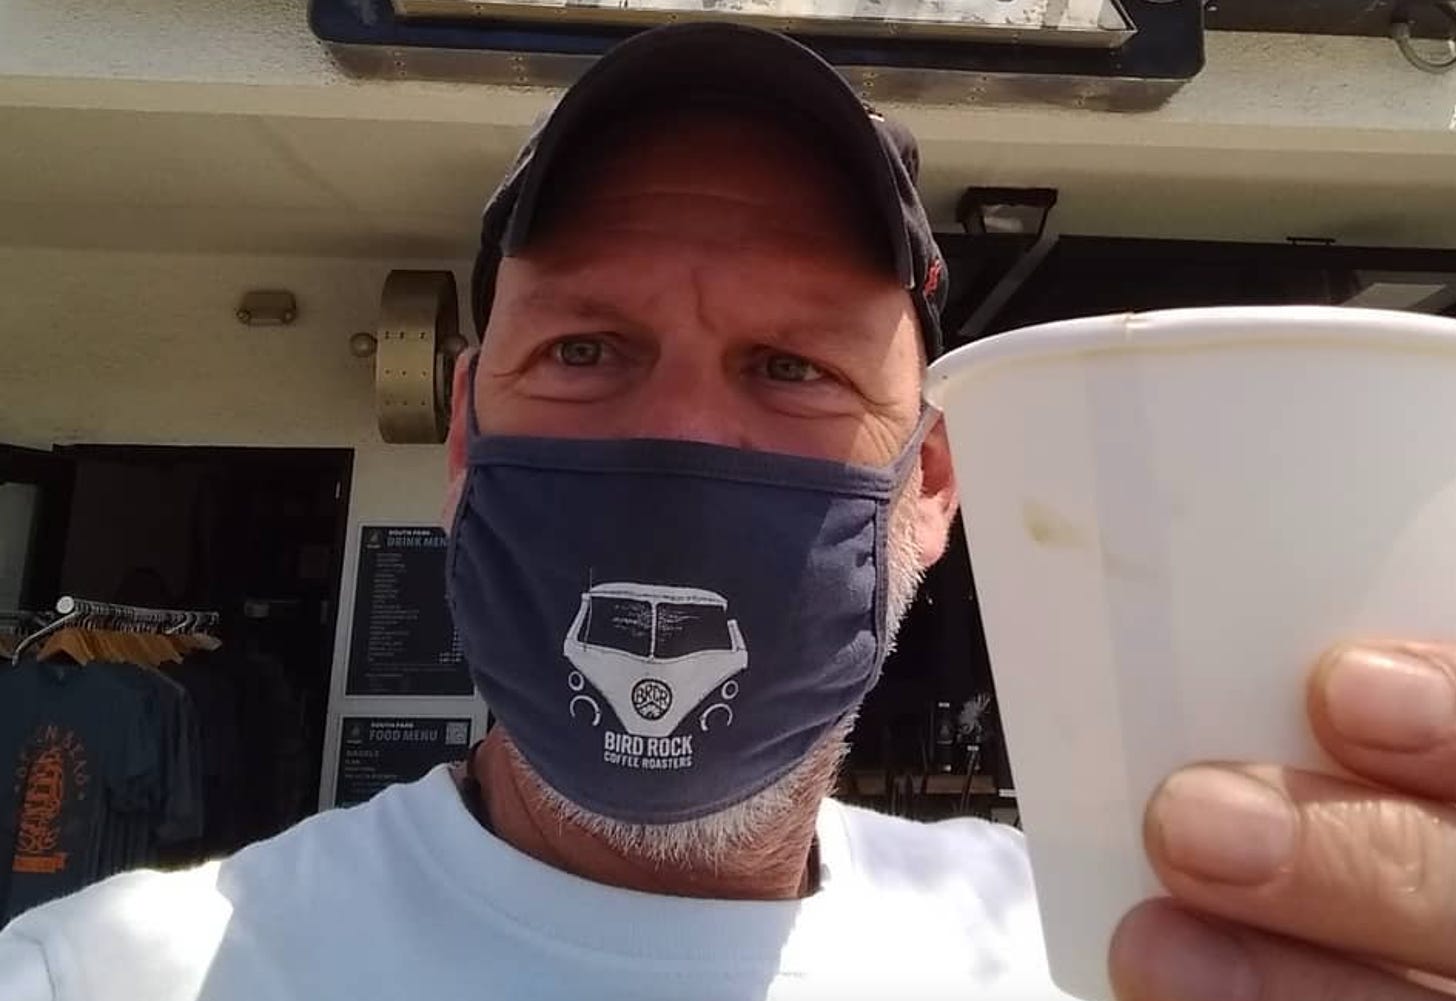 Selfie of a man in a baseball cap, wearing a blue face mask and holding a white takeout coffee cup up to the camera.